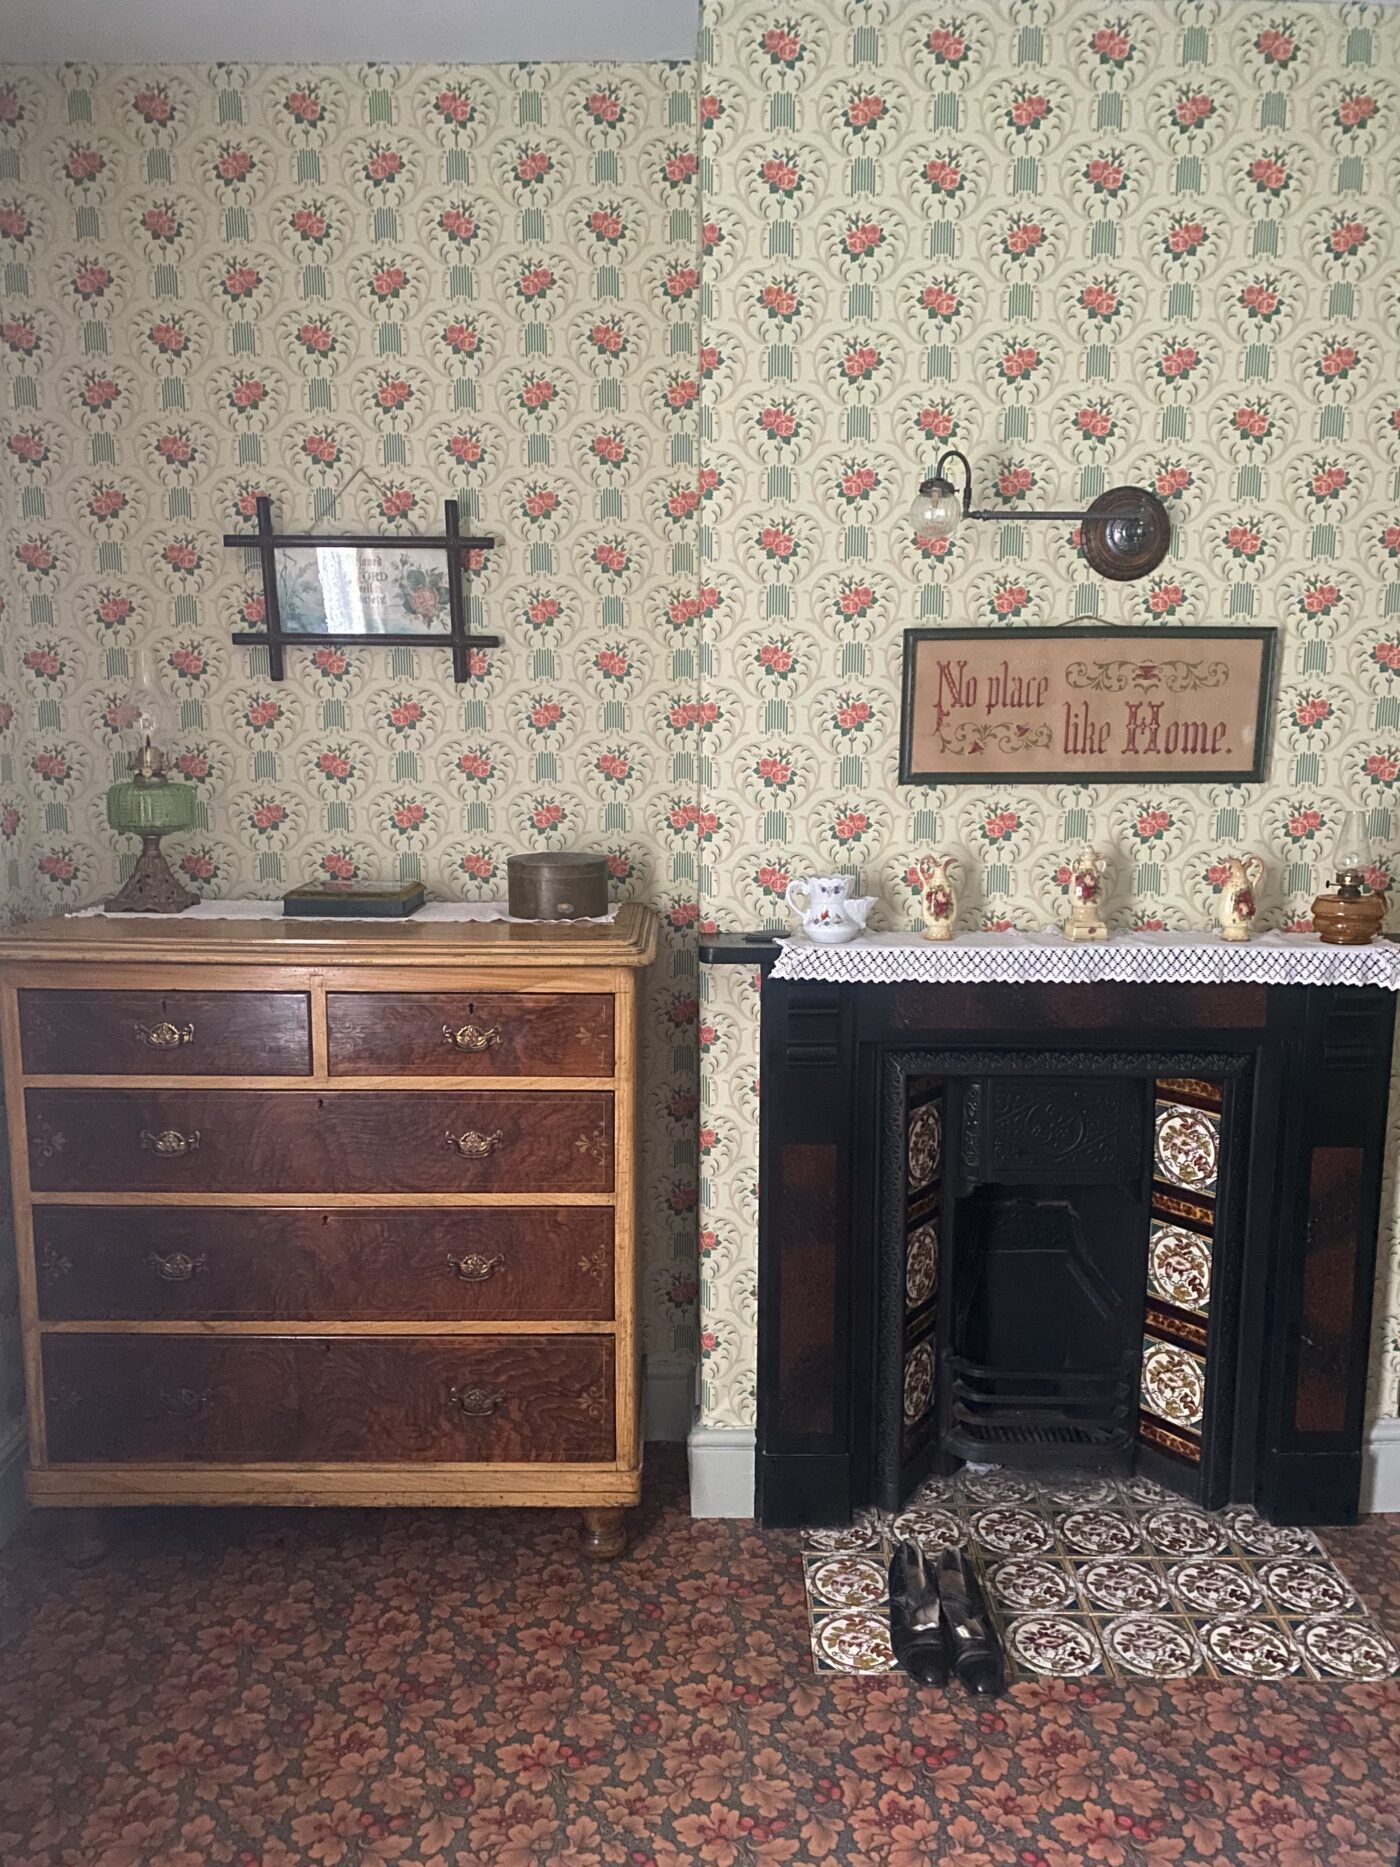 Victorian bedroom with 1905 recreated wallpaper and tiled fireplace